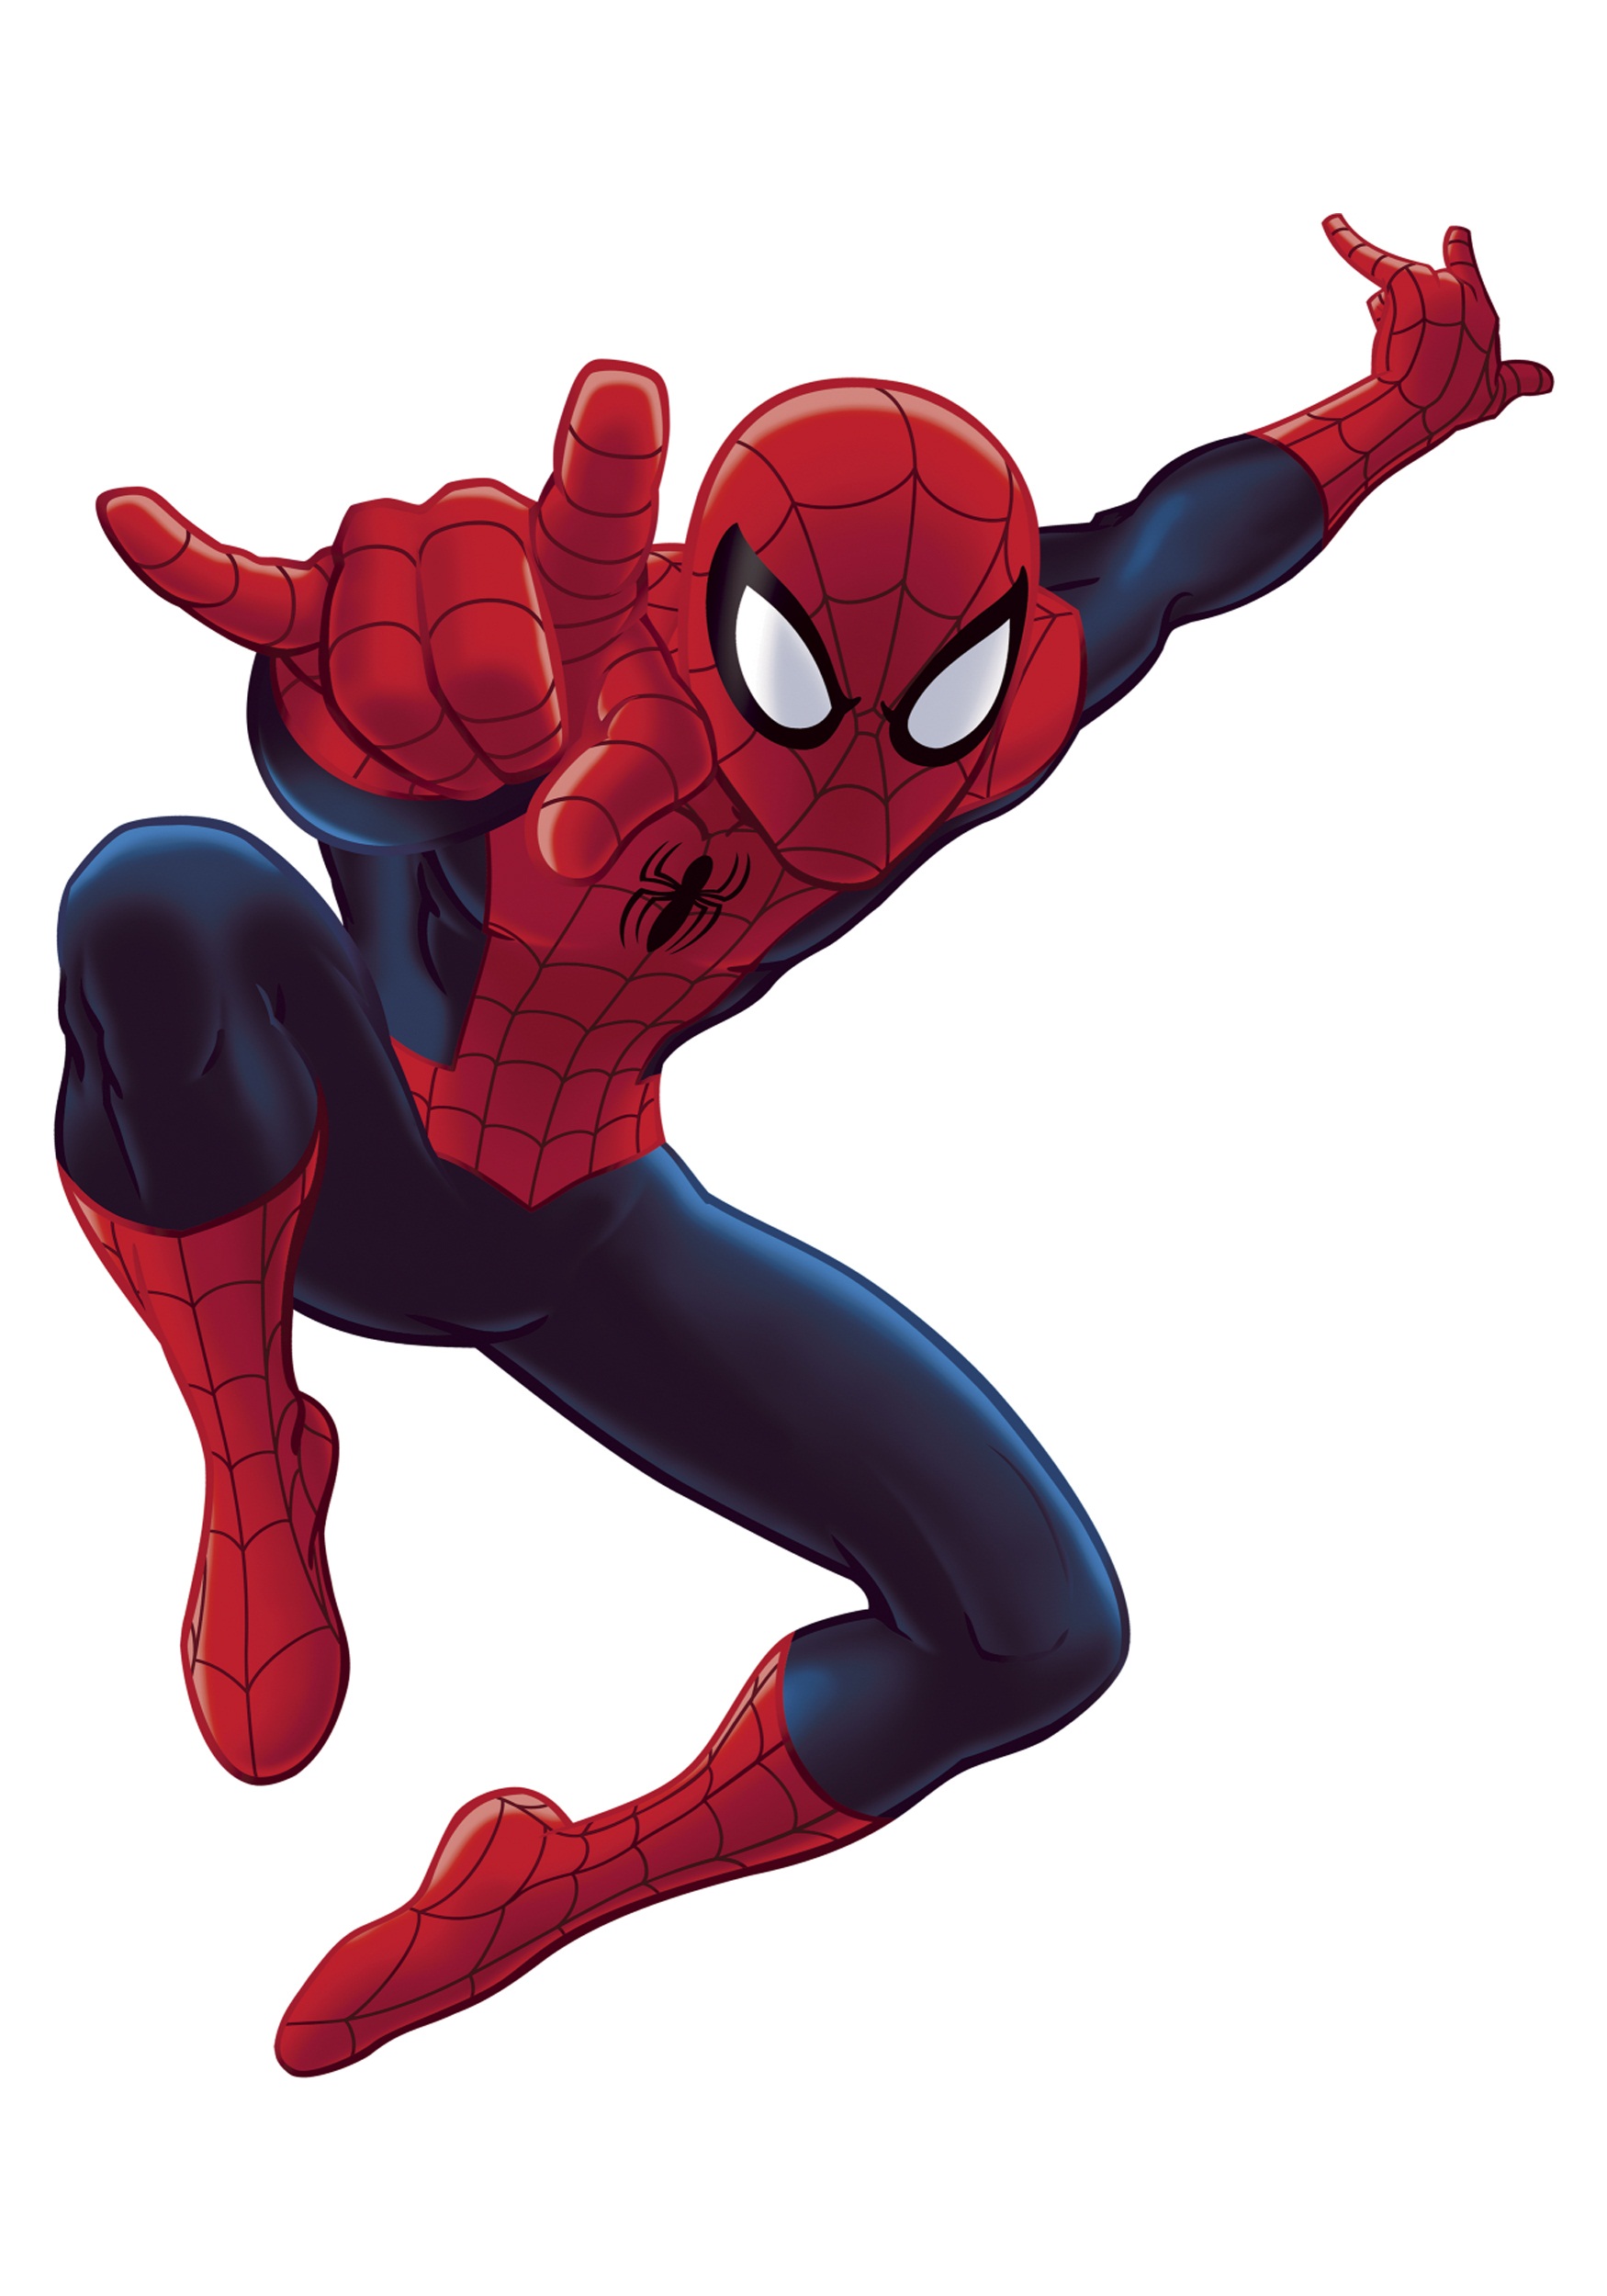 Plaatje Spiderman Free Cliparts That You Can Download To You